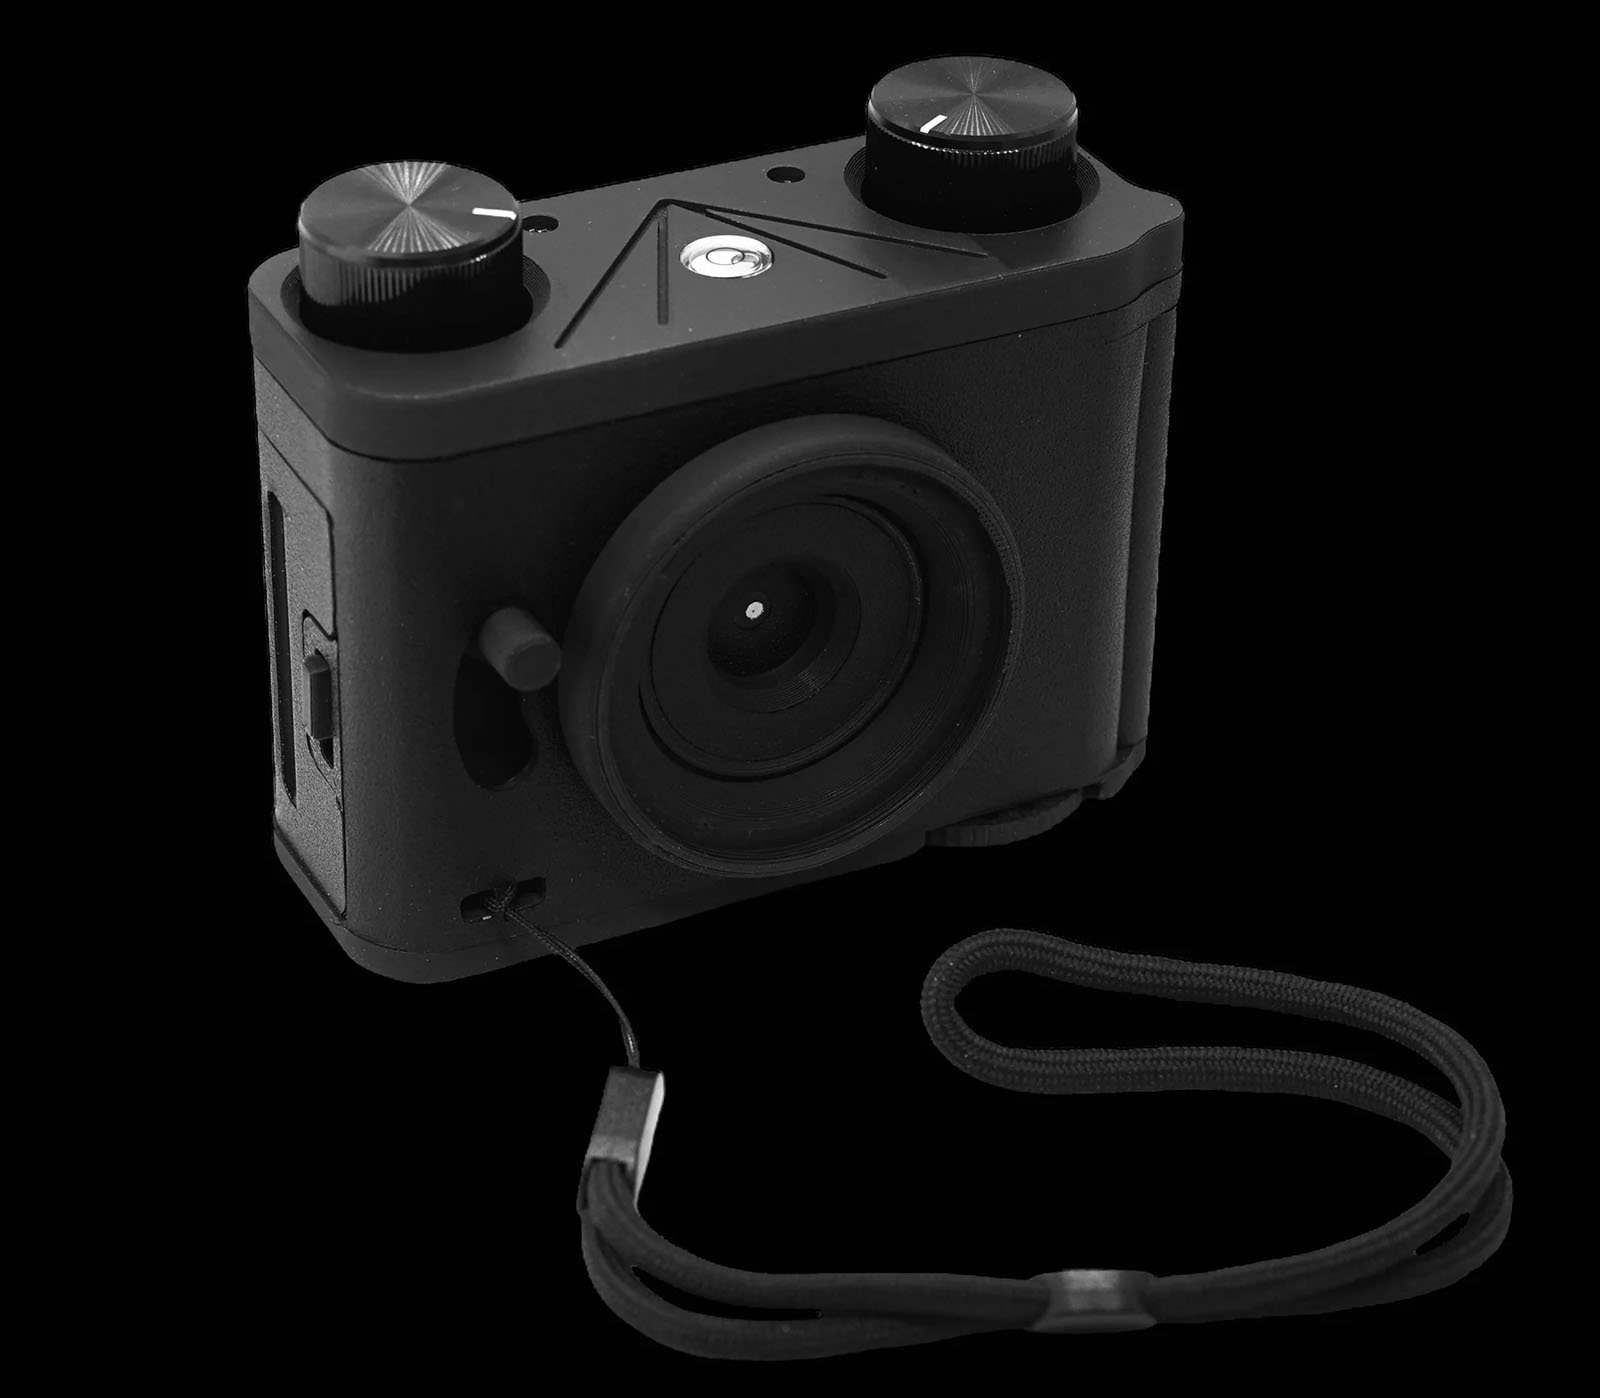 A black vintage style camera with two circular dials on top, a lens in the center, and a wrist strap attached to the side. The camera has a minimalist design and the overall shape is rectangular with rounded edges. Background is solid black.